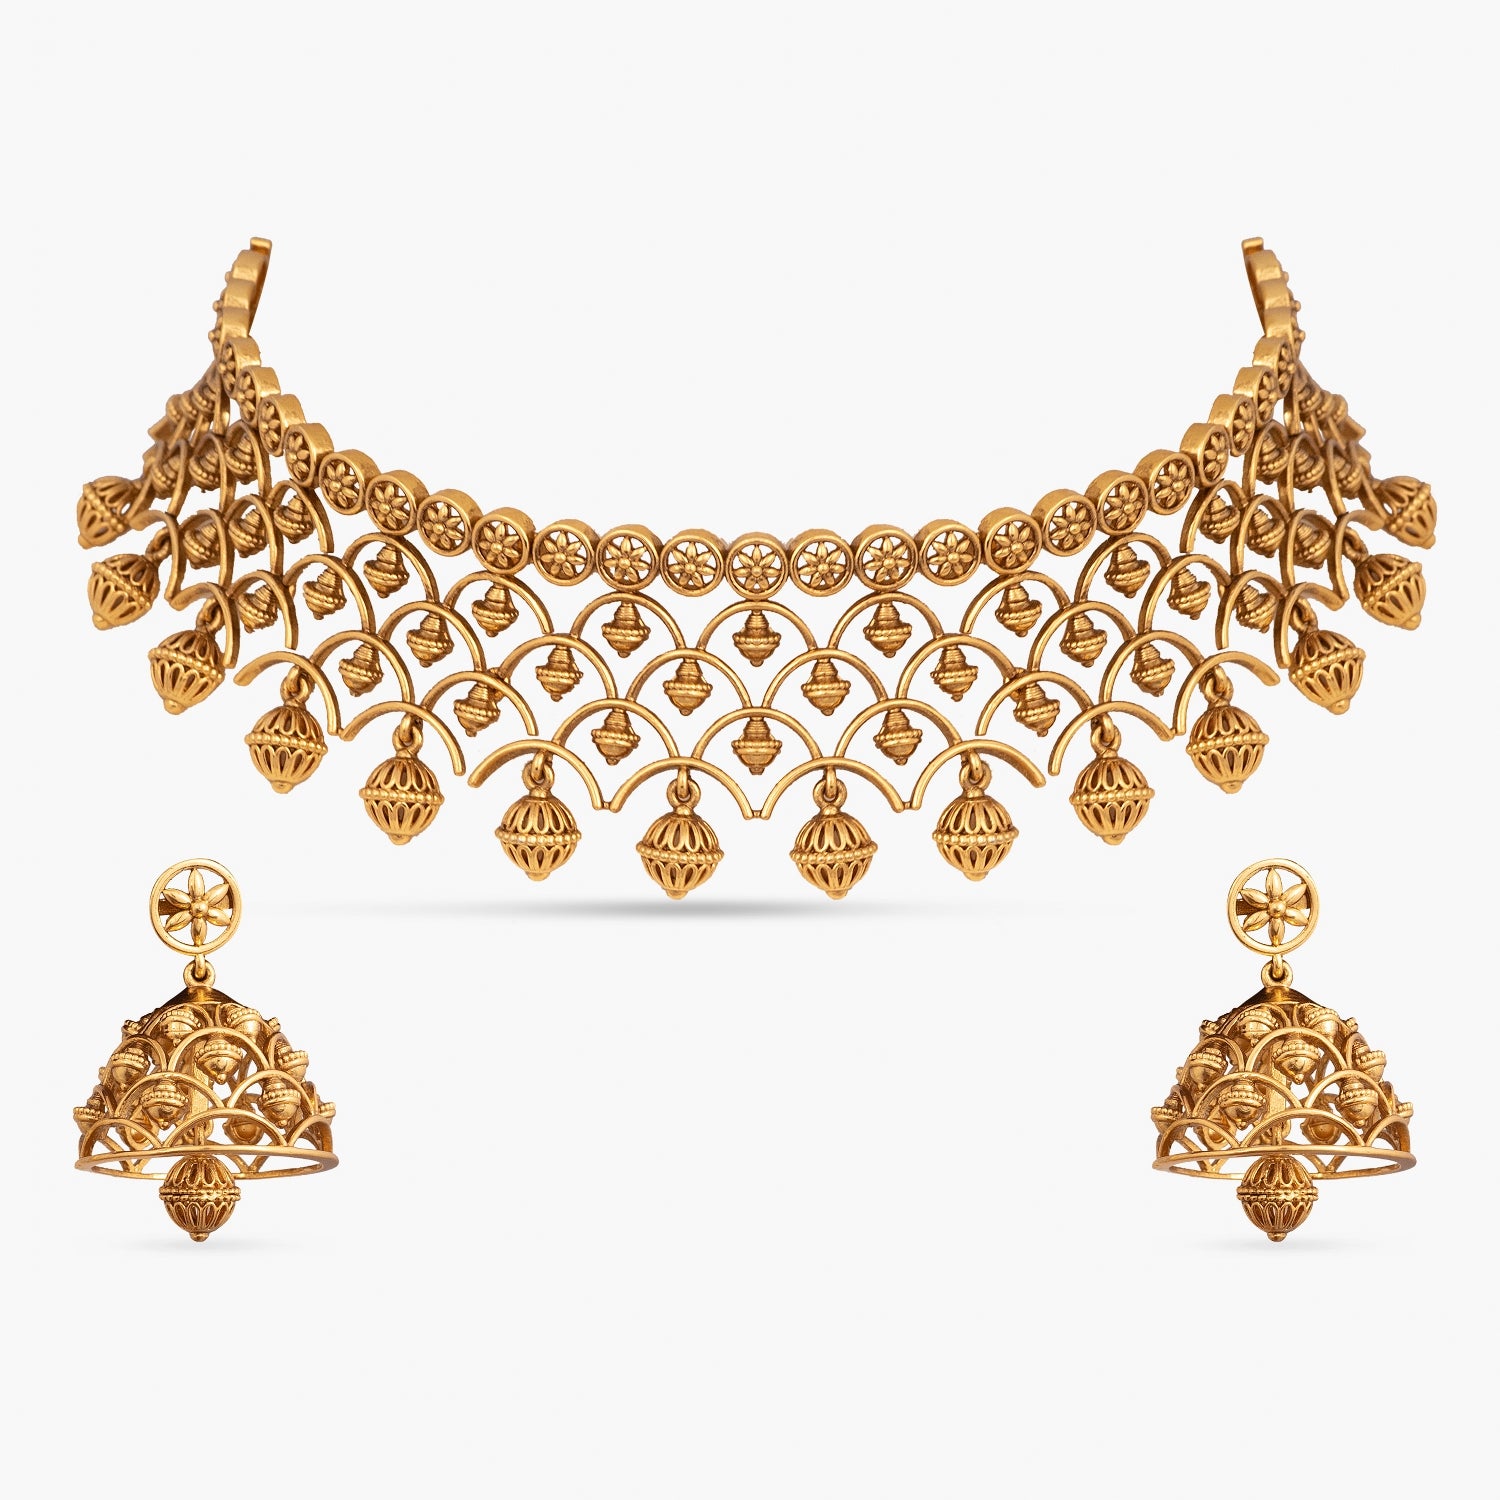 A picture of an Indian artificial antique jewelry set with a gold-toned choker necklace and matching jhumka earrings.